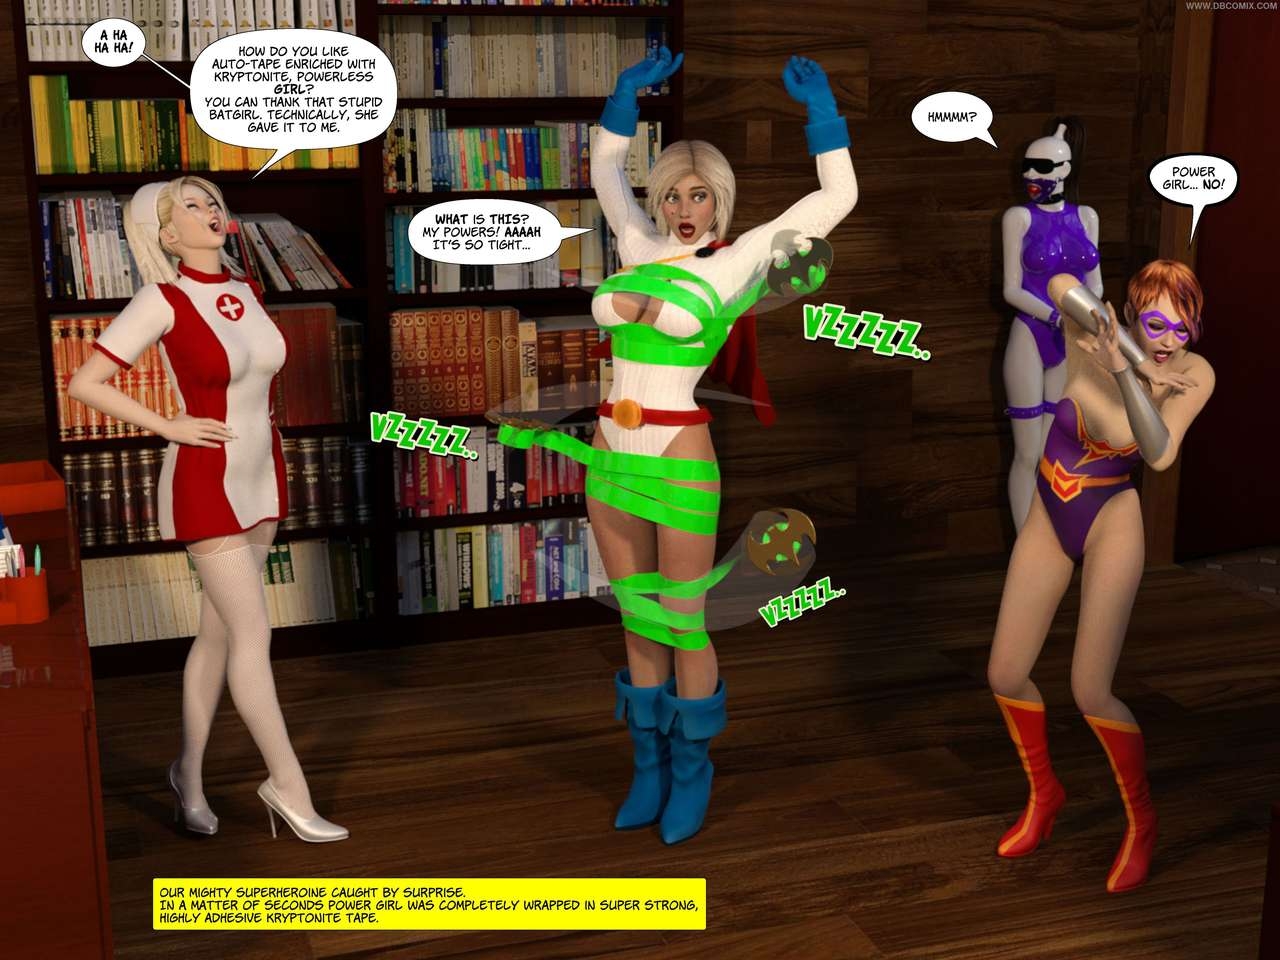 [DBComix] New Arkham for Superheroines 5 - All Work and No Play 58